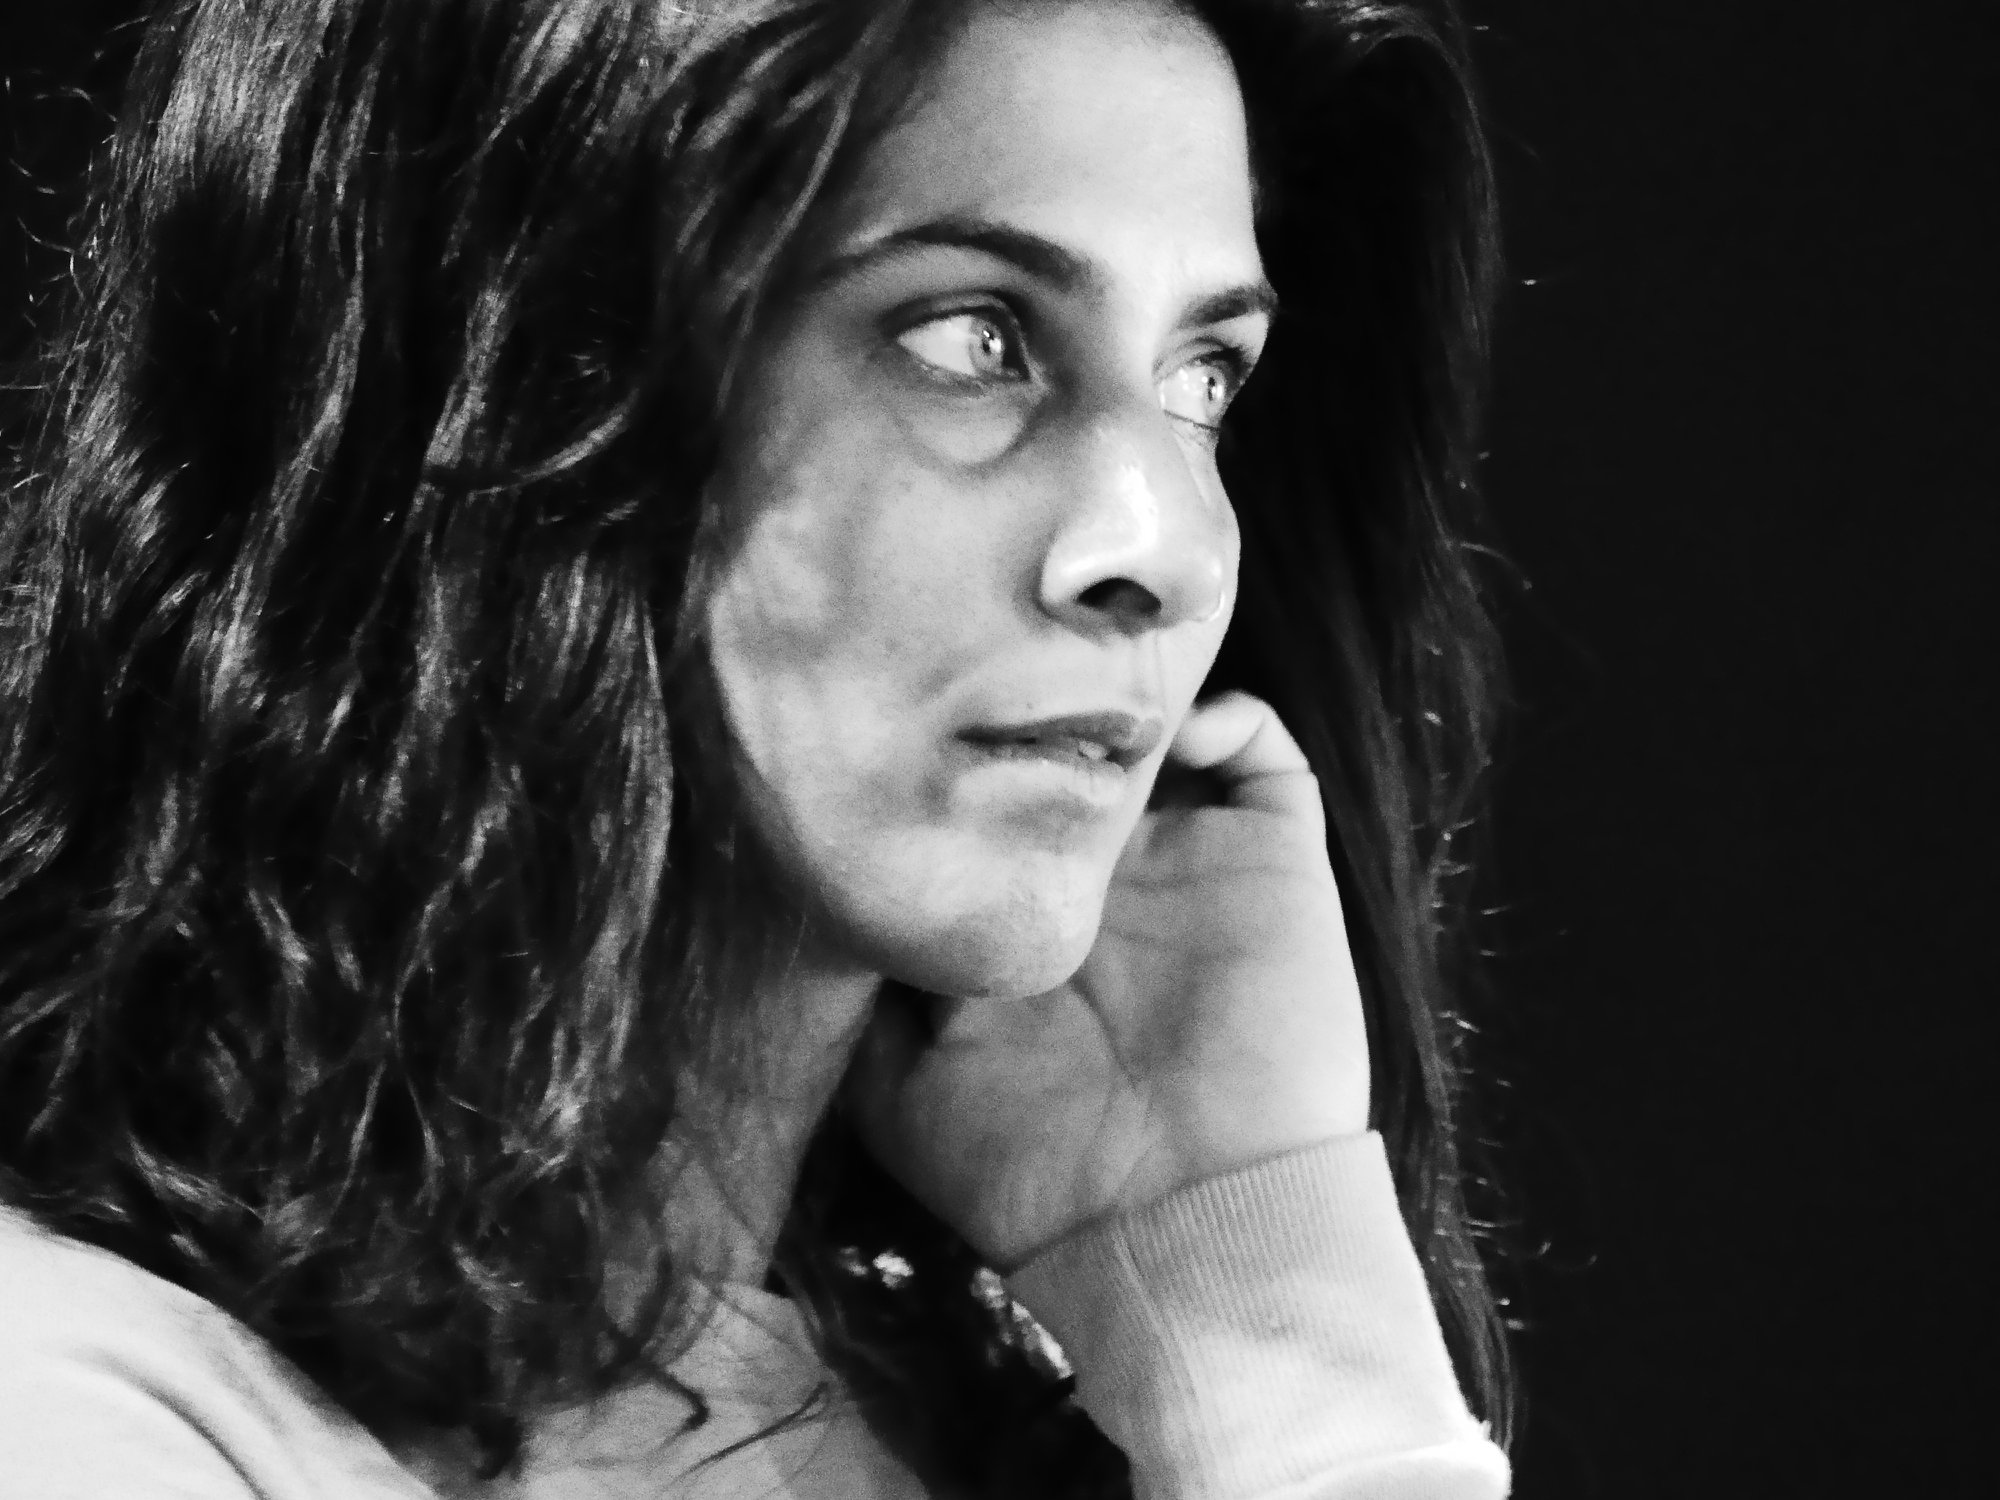 A black and white headshot in side profile of a brown femme with light eyes, dark wavy hair, nosering, holding hand to cheek and gazing into the distance.